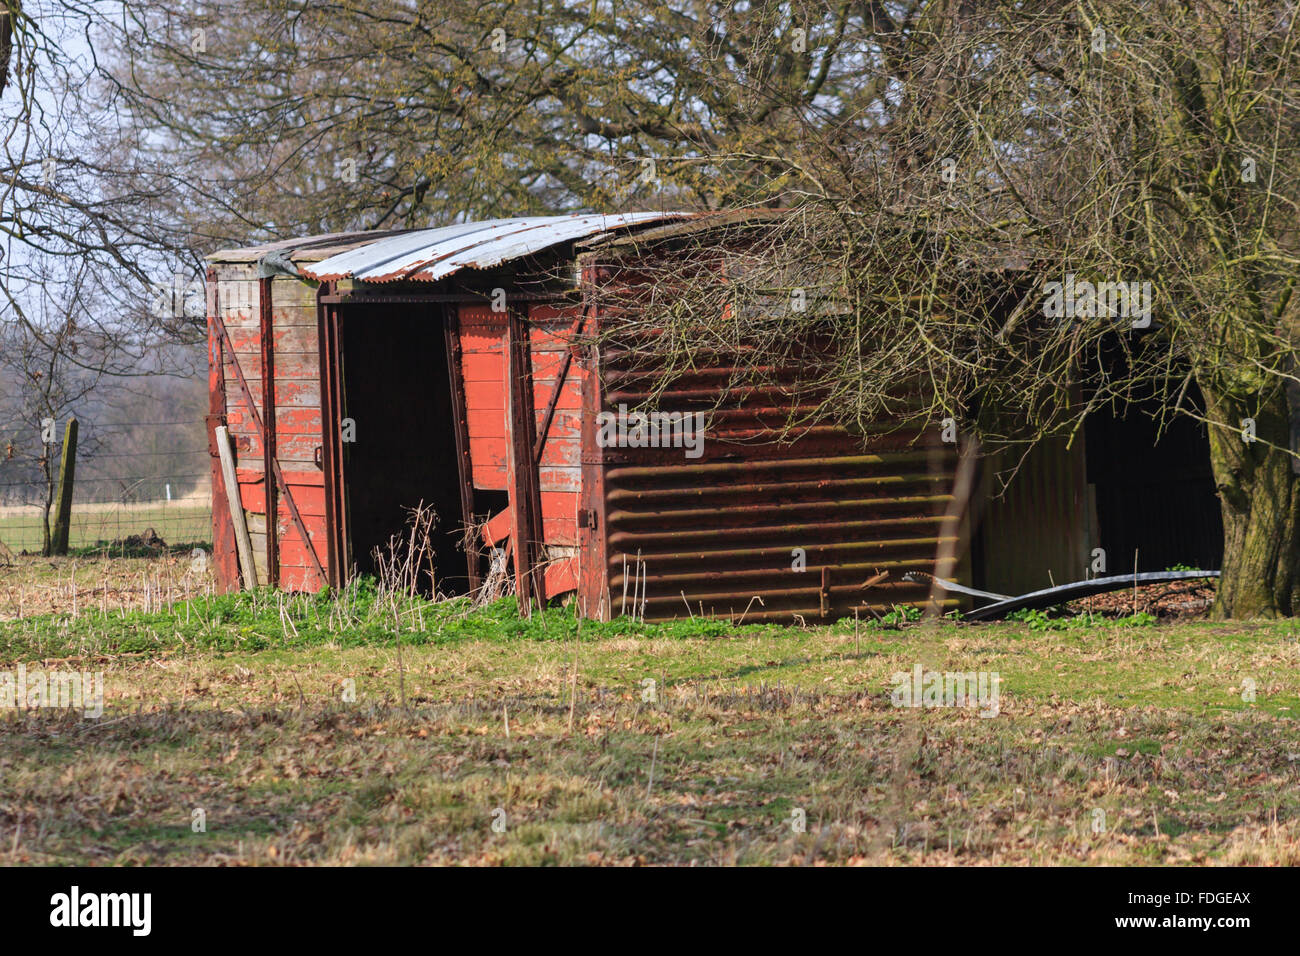 Disused railway goods van now used as a shelter for livestock UK Stock Photo